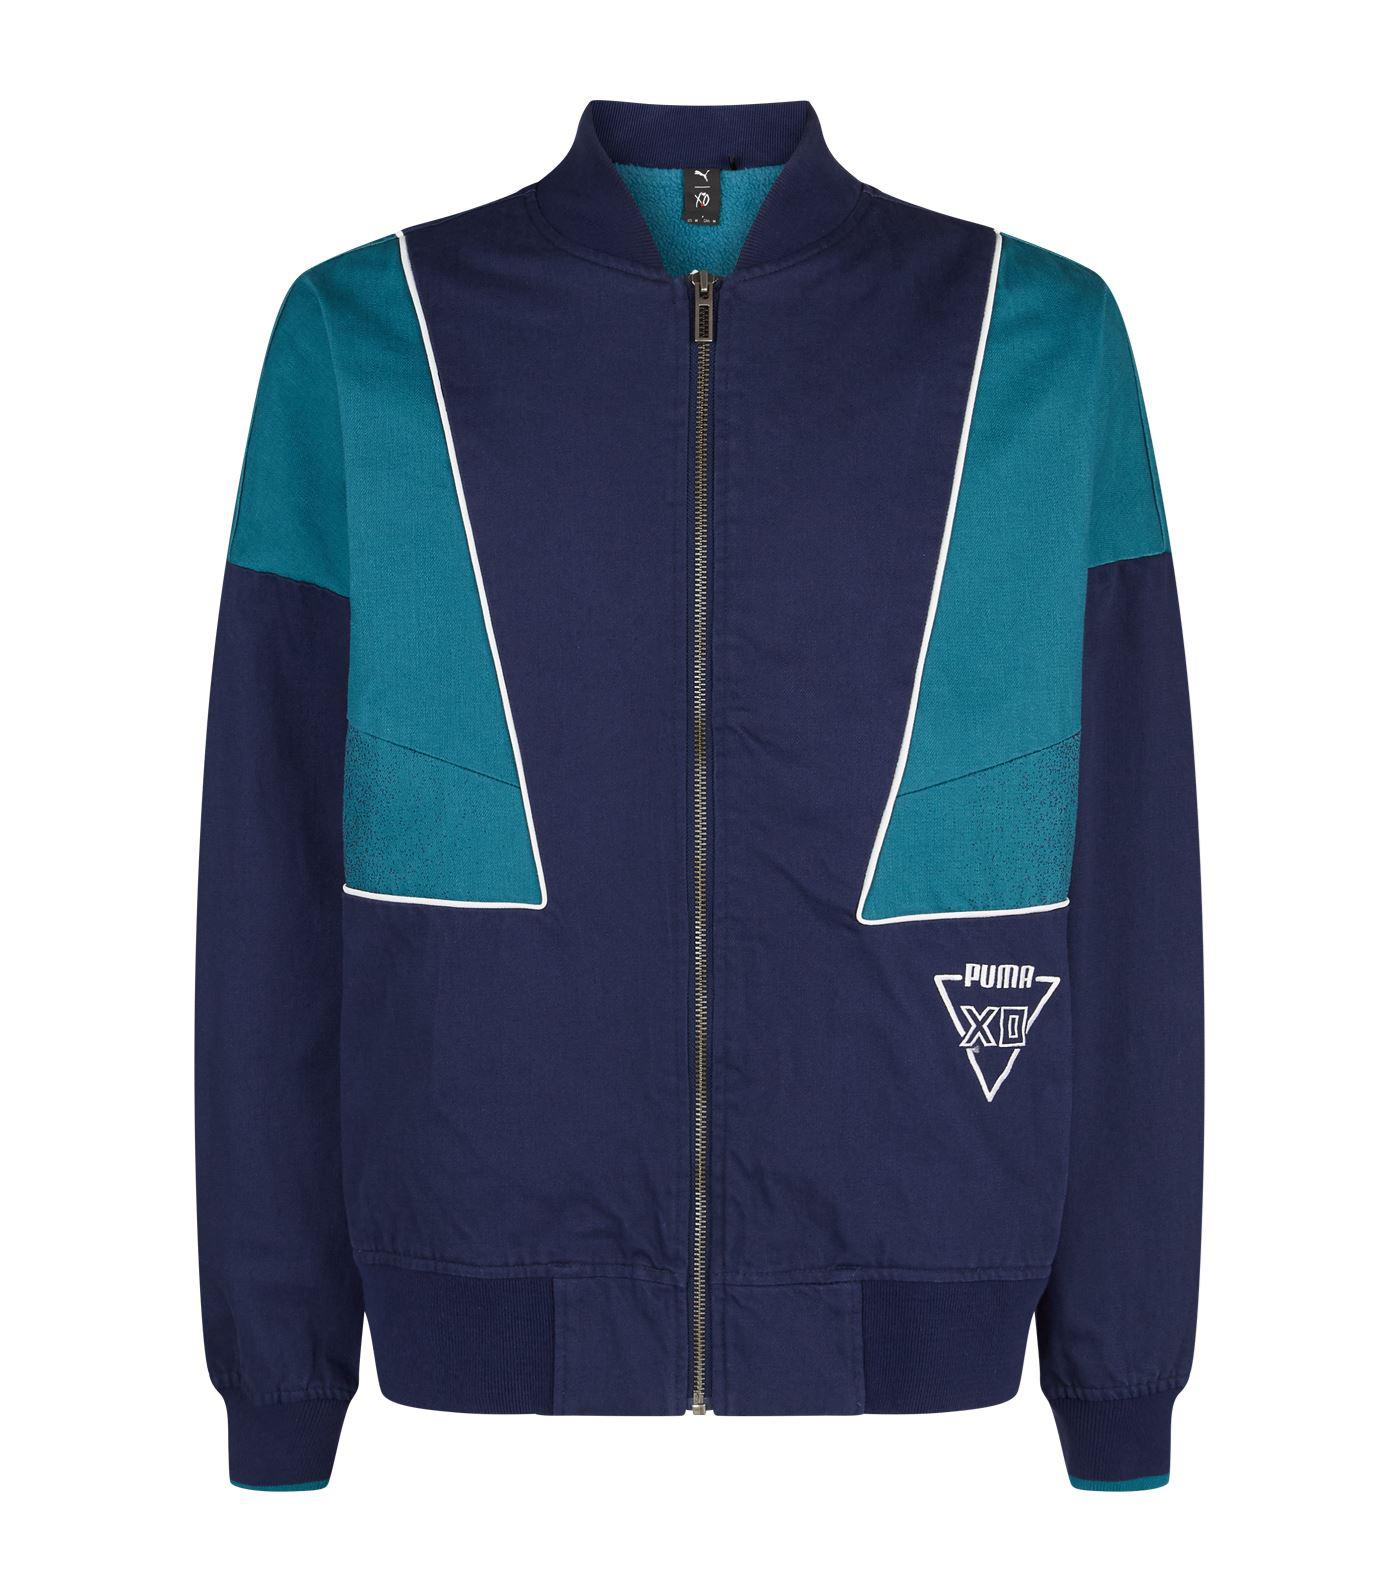 PUMA Fleece X Xo Homage To Archive Vintage Bomber Jacket in Blue for Men -  Lyst